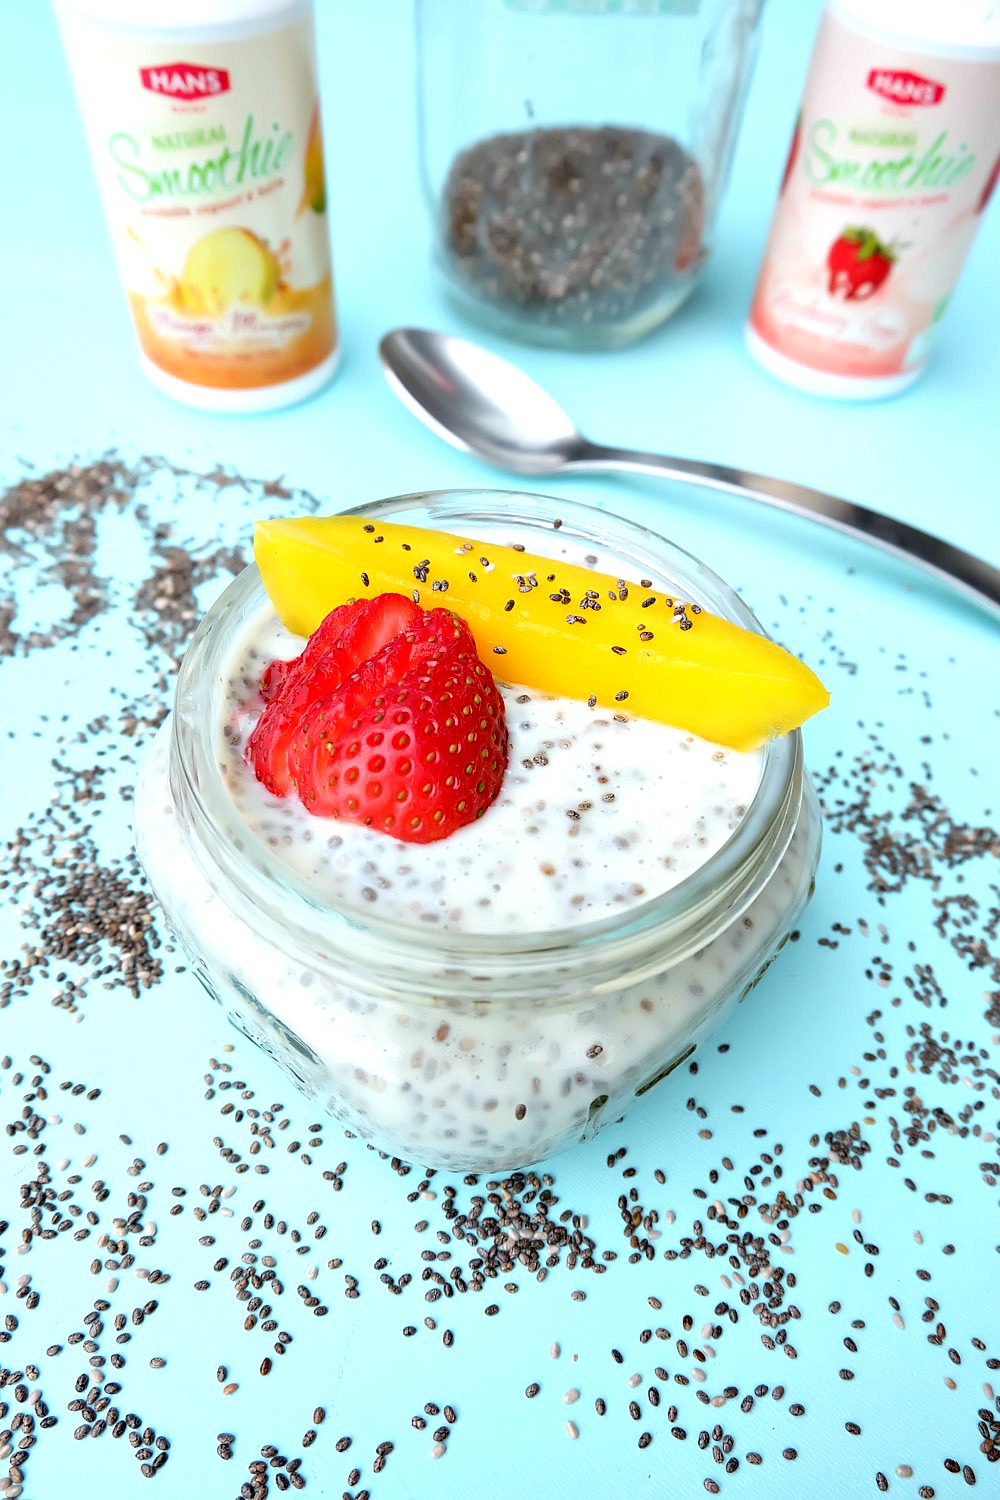 Breakfast is ready with only 30 seconds of prep work with this delicious and nutritious, protein packed breakfast idea! Kids can help make this 30 second prep easy chia pudding recipe in flavors like mango, strawberry, blueberry, passionfruit and peach! 